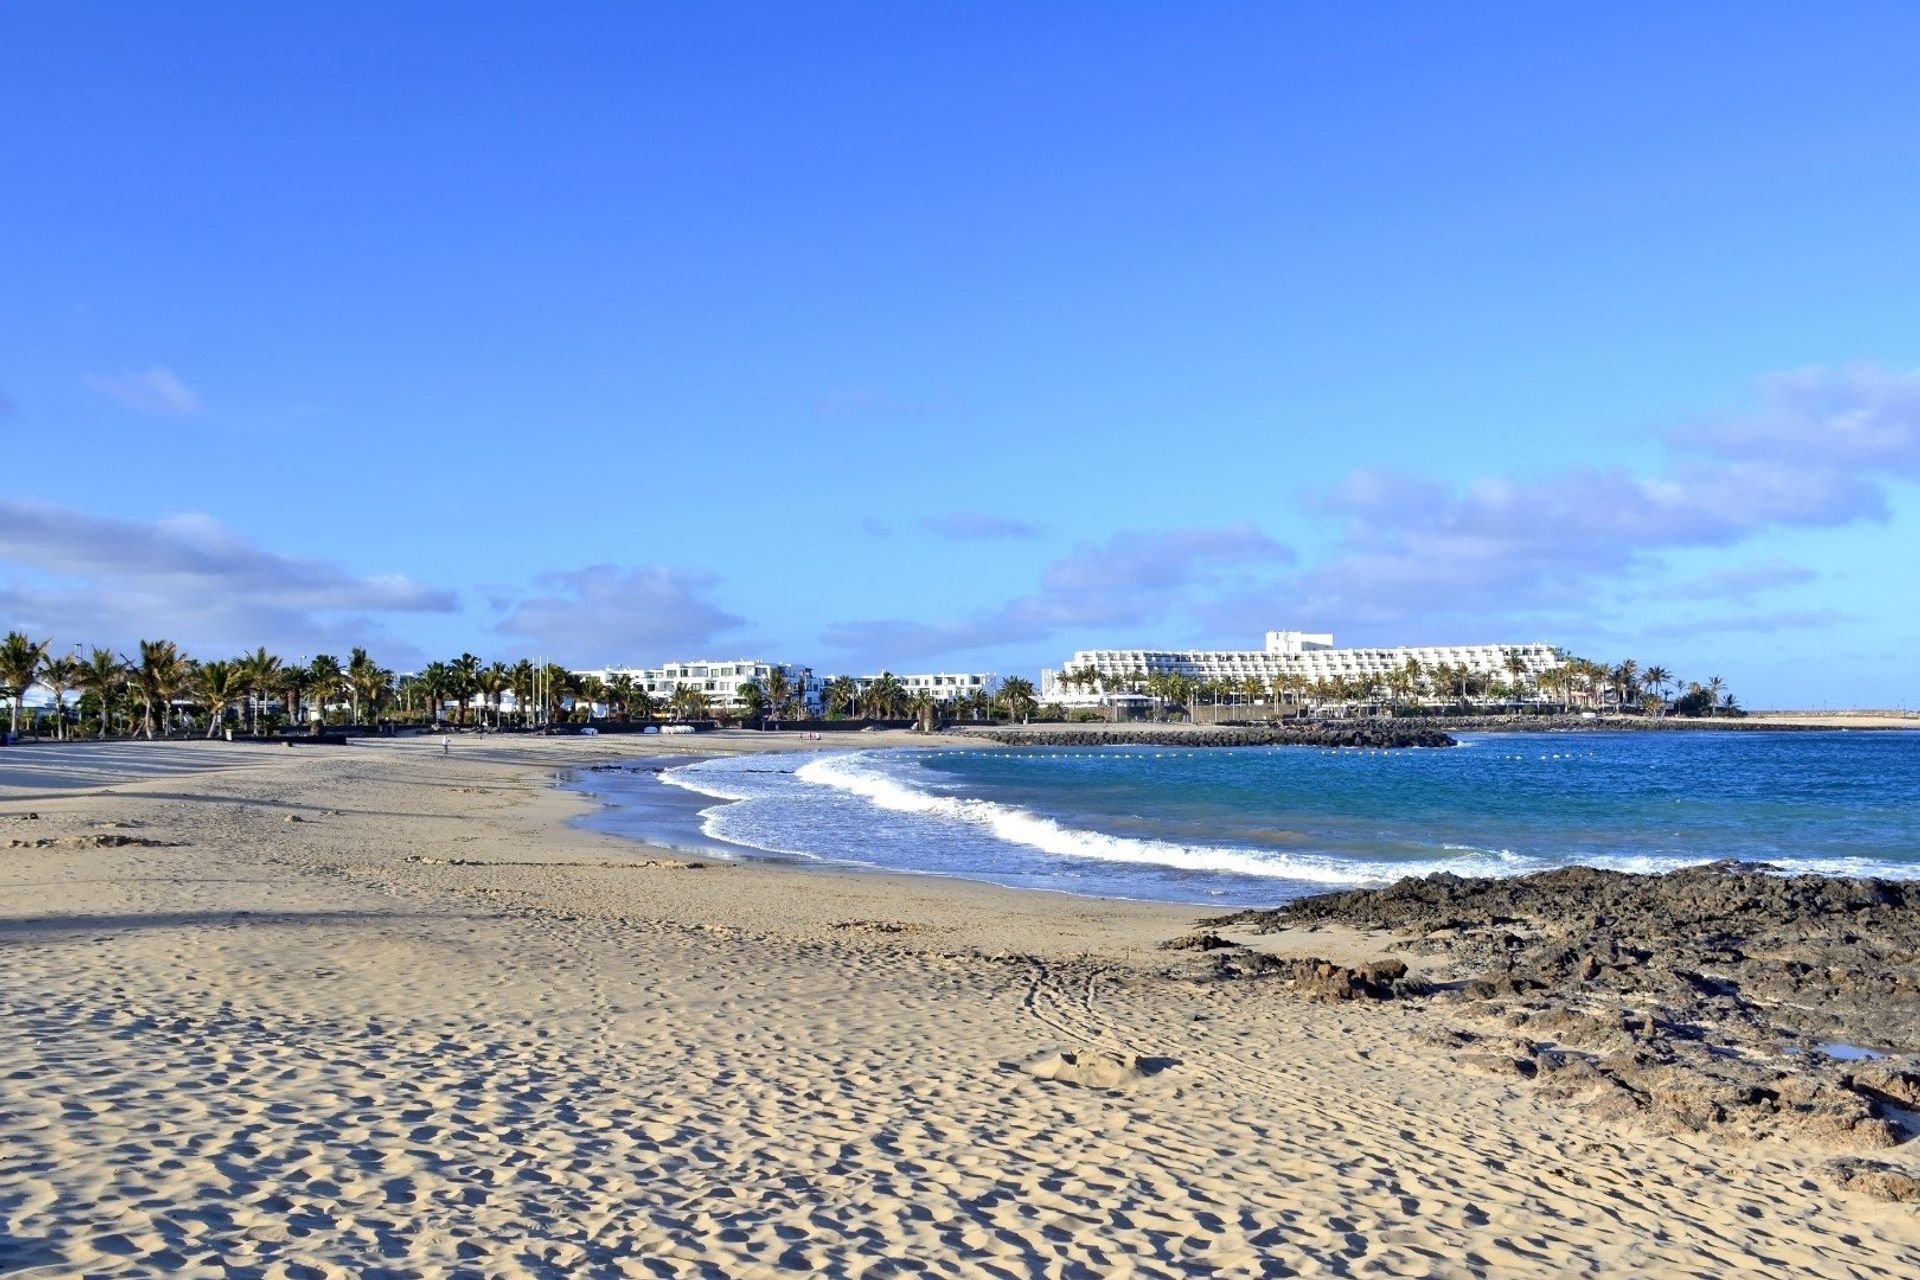 Blue Flag Chucharas beach is the perfect place for a fun family day out by the coast